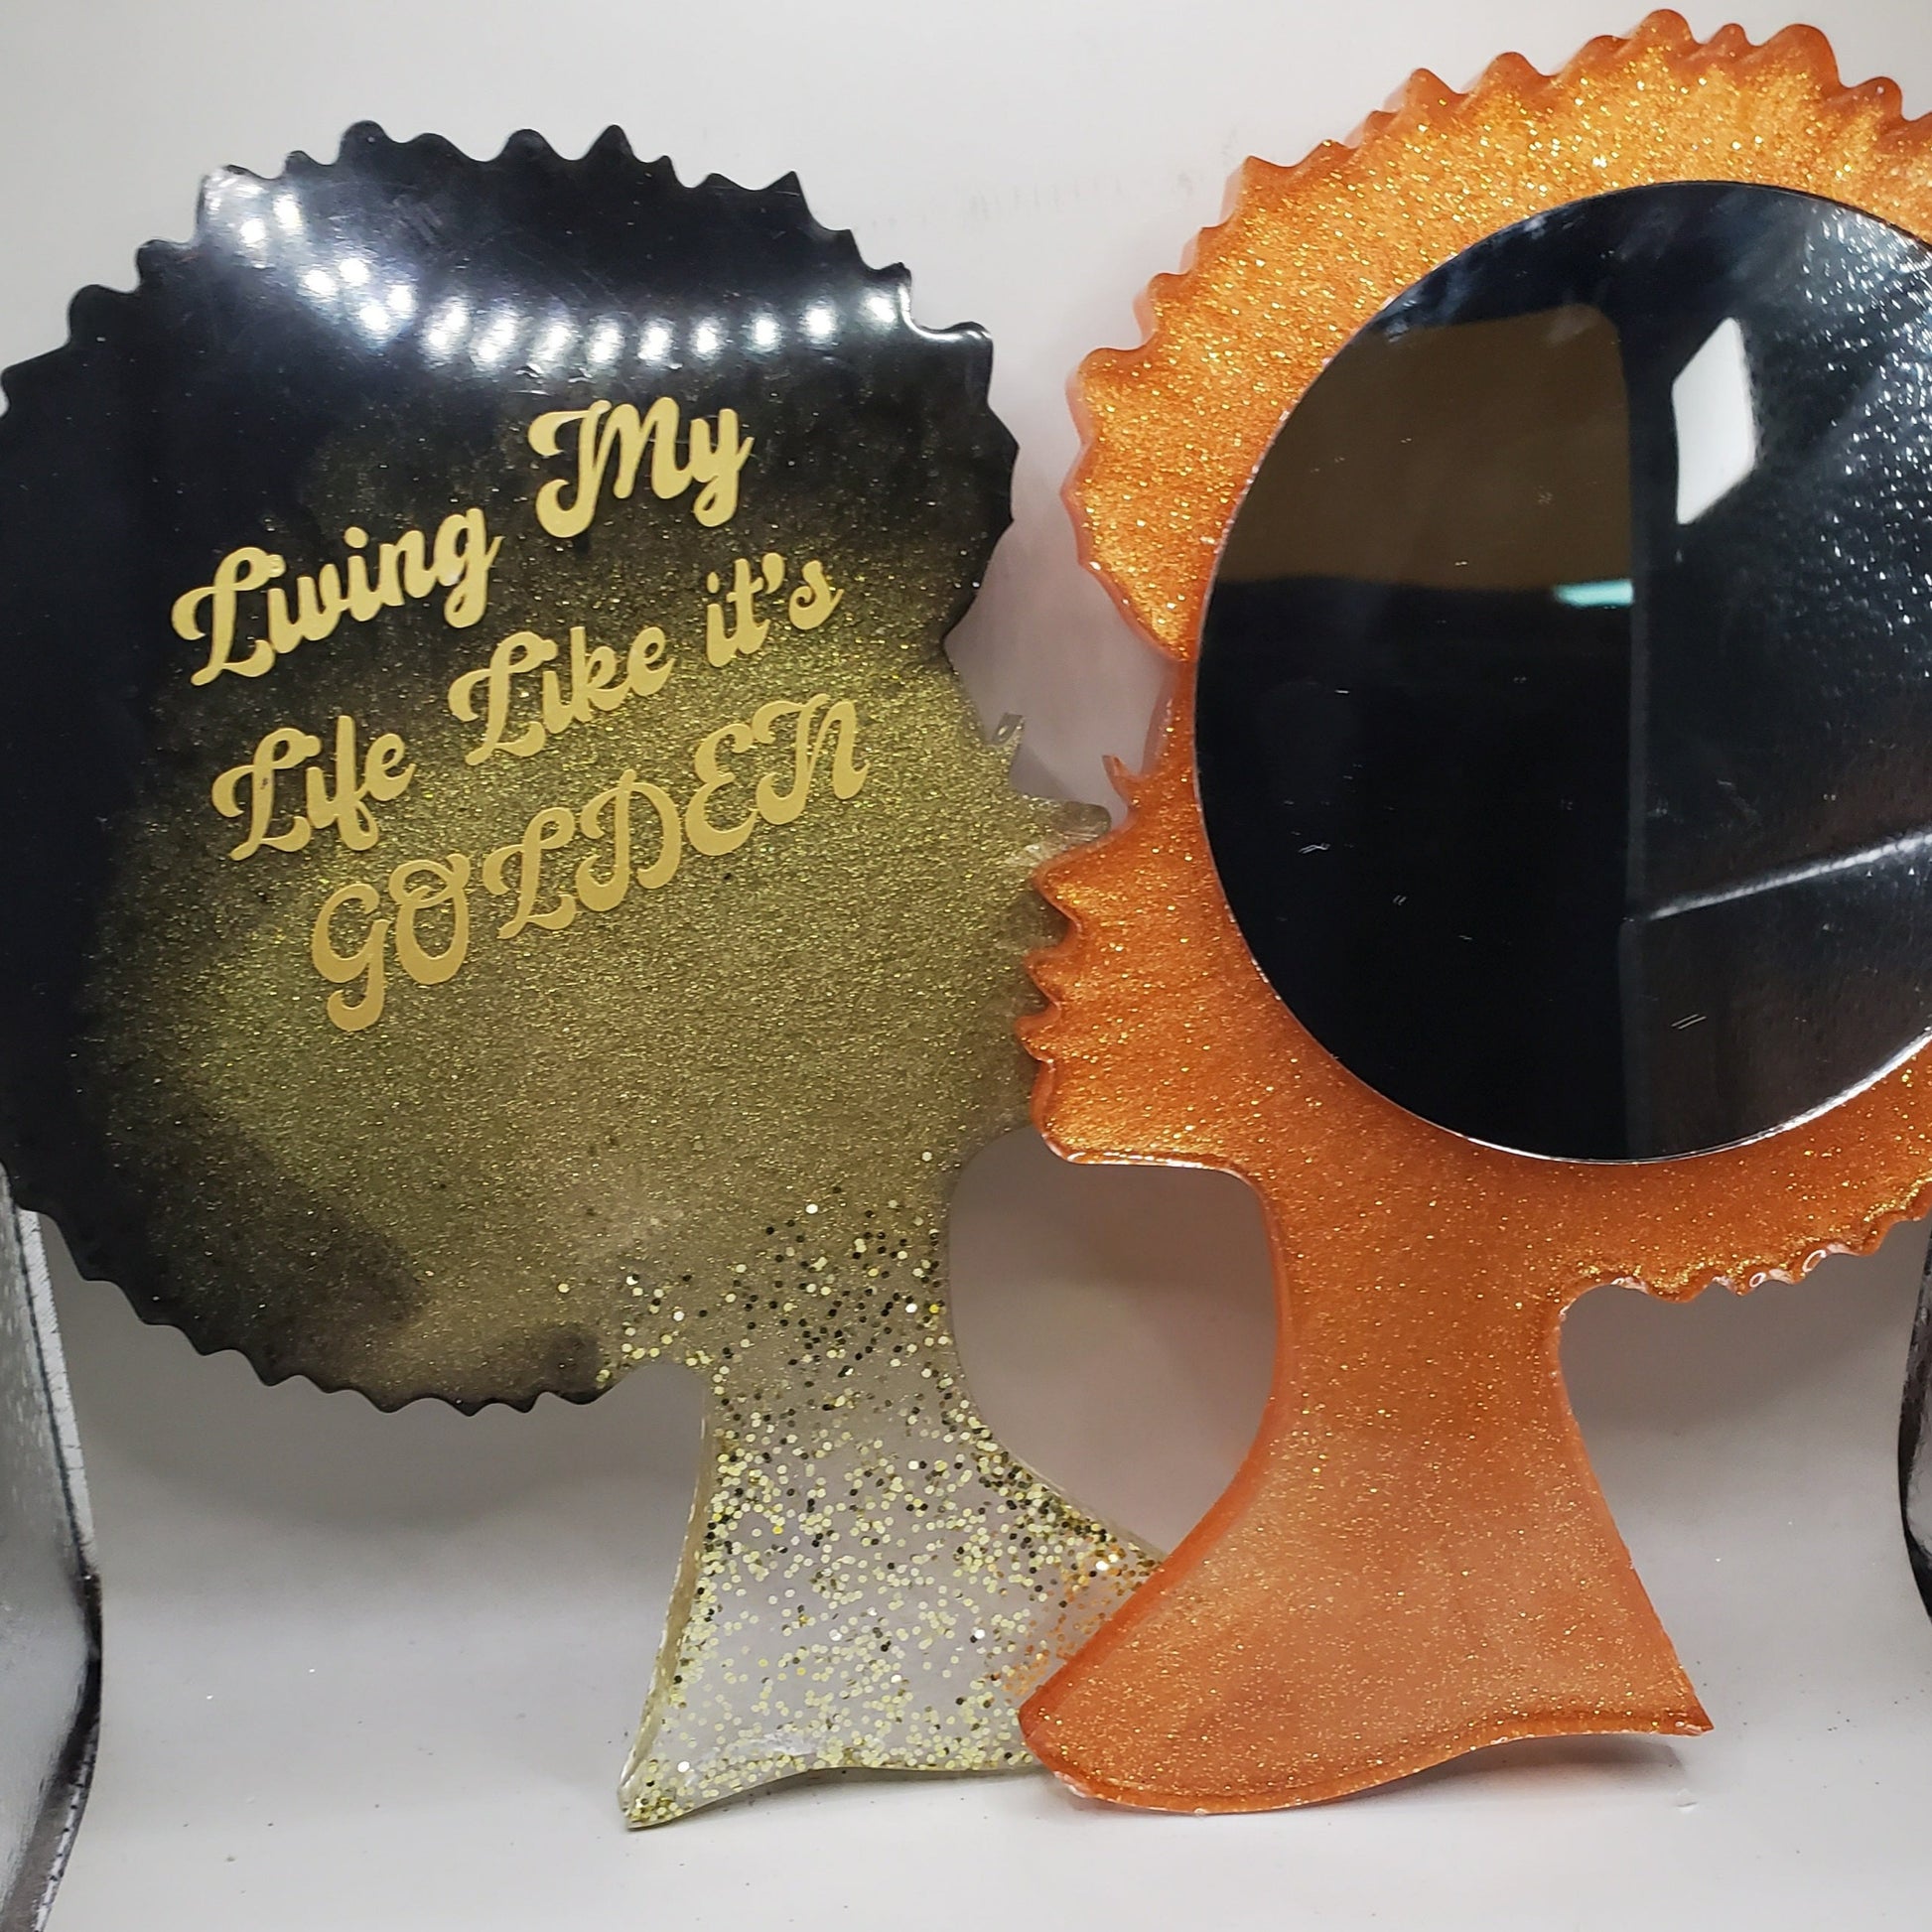 Cusom designed hand held mirrors. Durable, easy to carry.